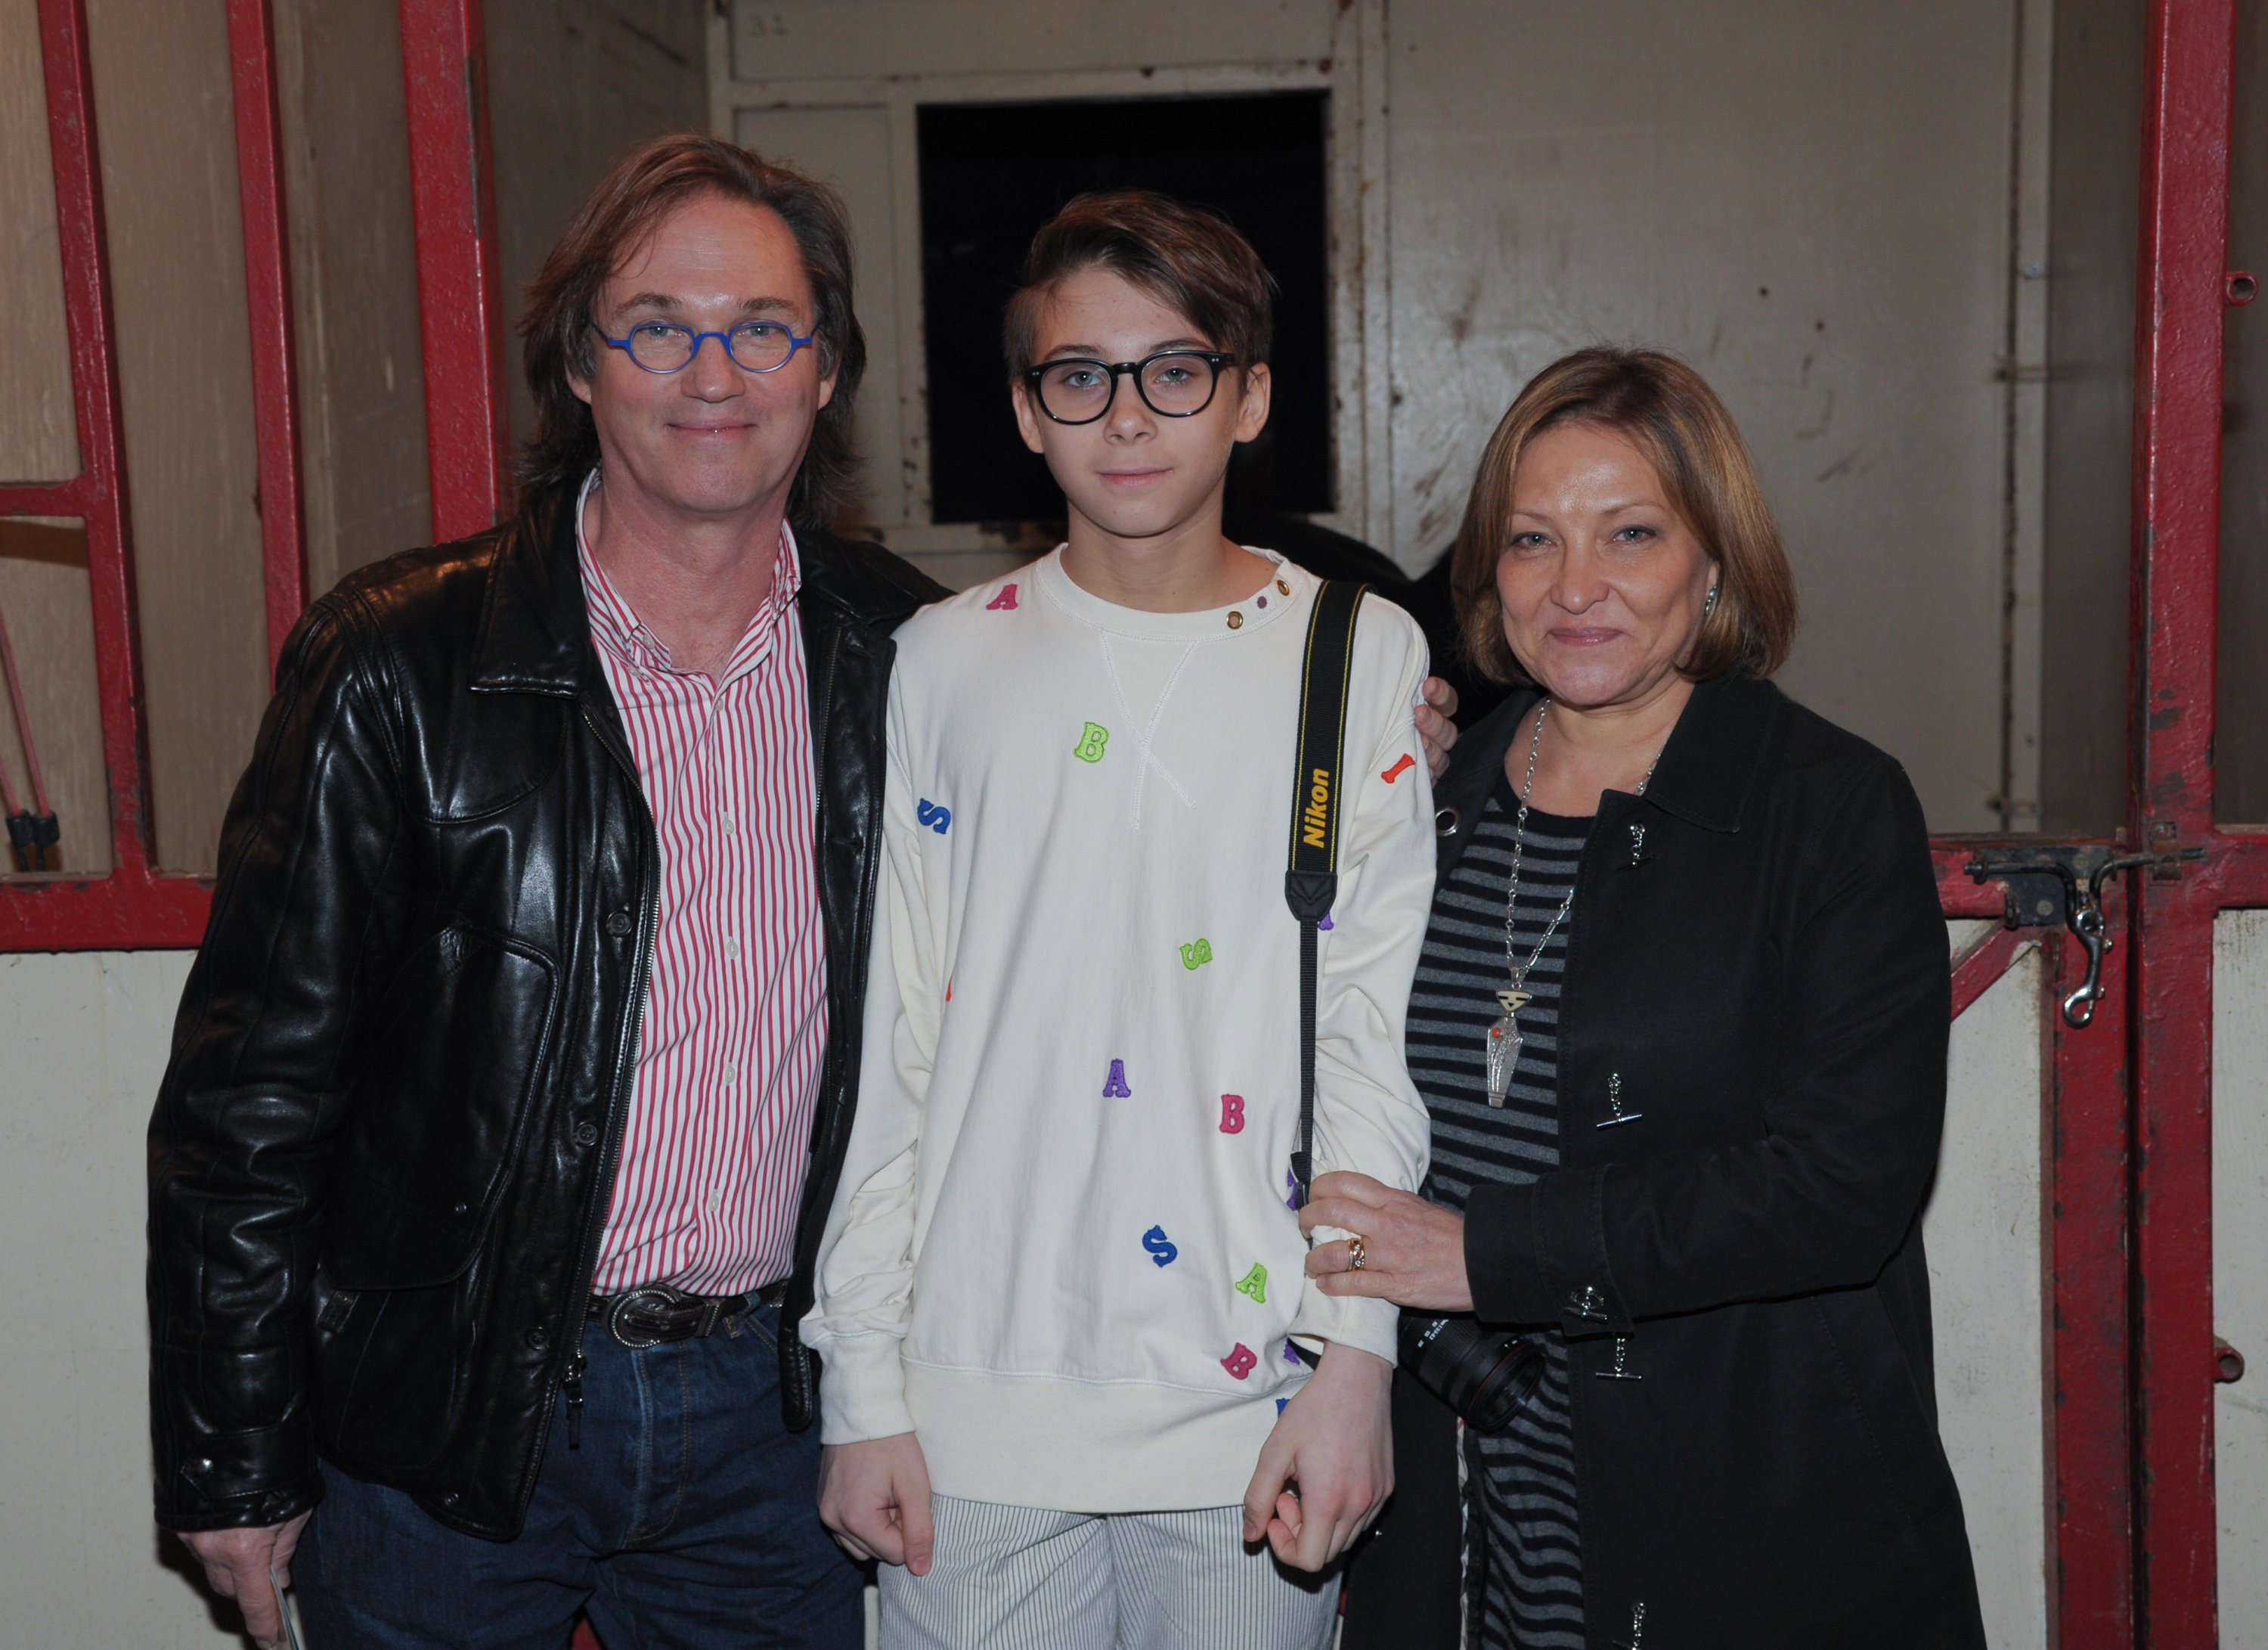 Richard Thomas, son Montana James Thomas and wife Georgiana Bischoff Thomas attend 34th season Big Apple Circus Under the Big Top in Damrosch Park on October 23, 2011 in New York City | Source: Getty Images